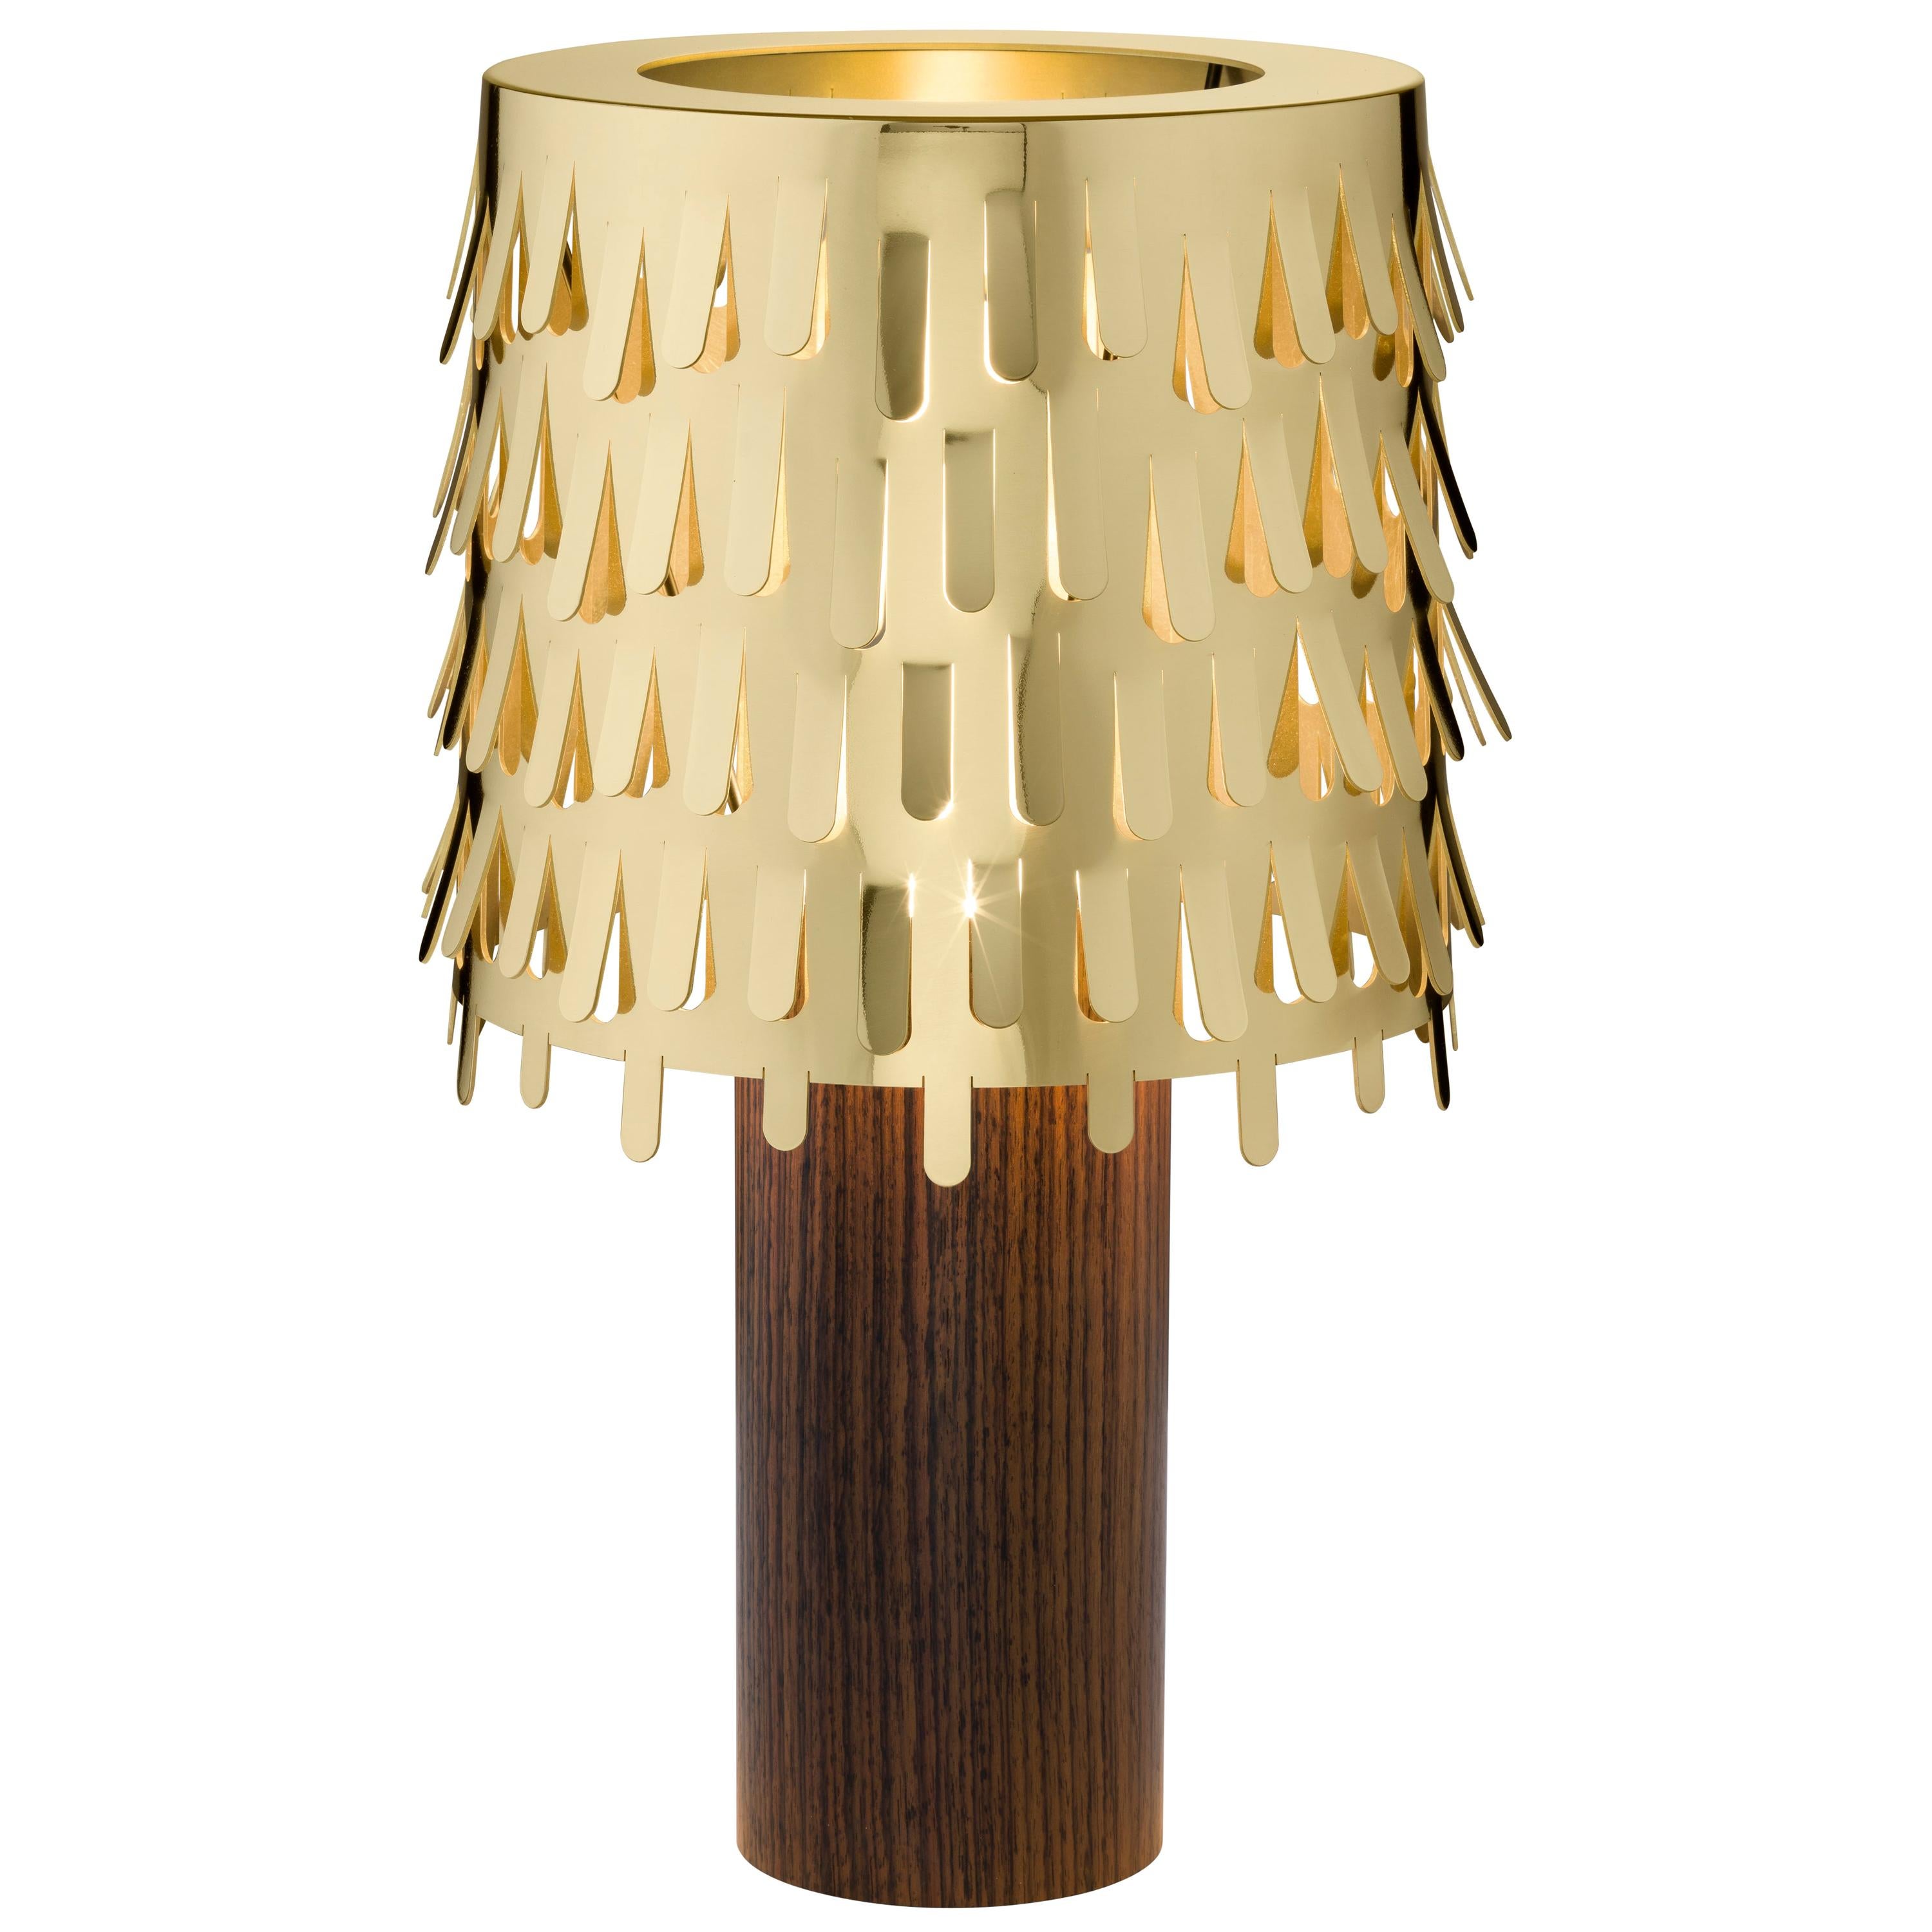 Ghidini 1961 Jackfruit Table Lamp in Brass and Wood by Campana Brothers